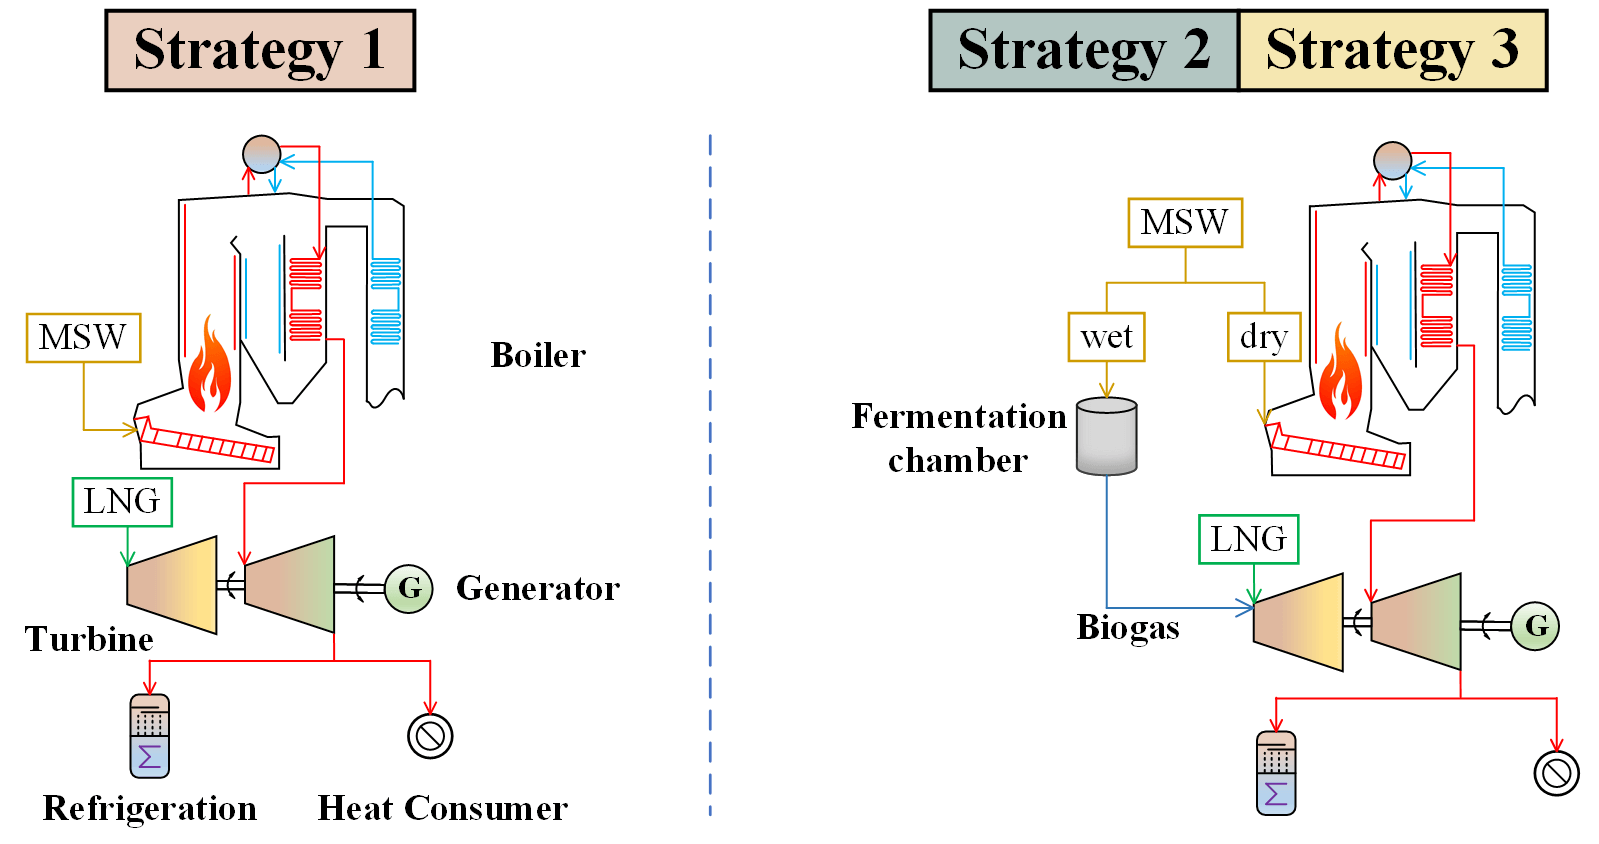 Analysis and Economic Evaluation of Hourly Operation Strategy Based on MSW Classification and LNG Multi-Generation System